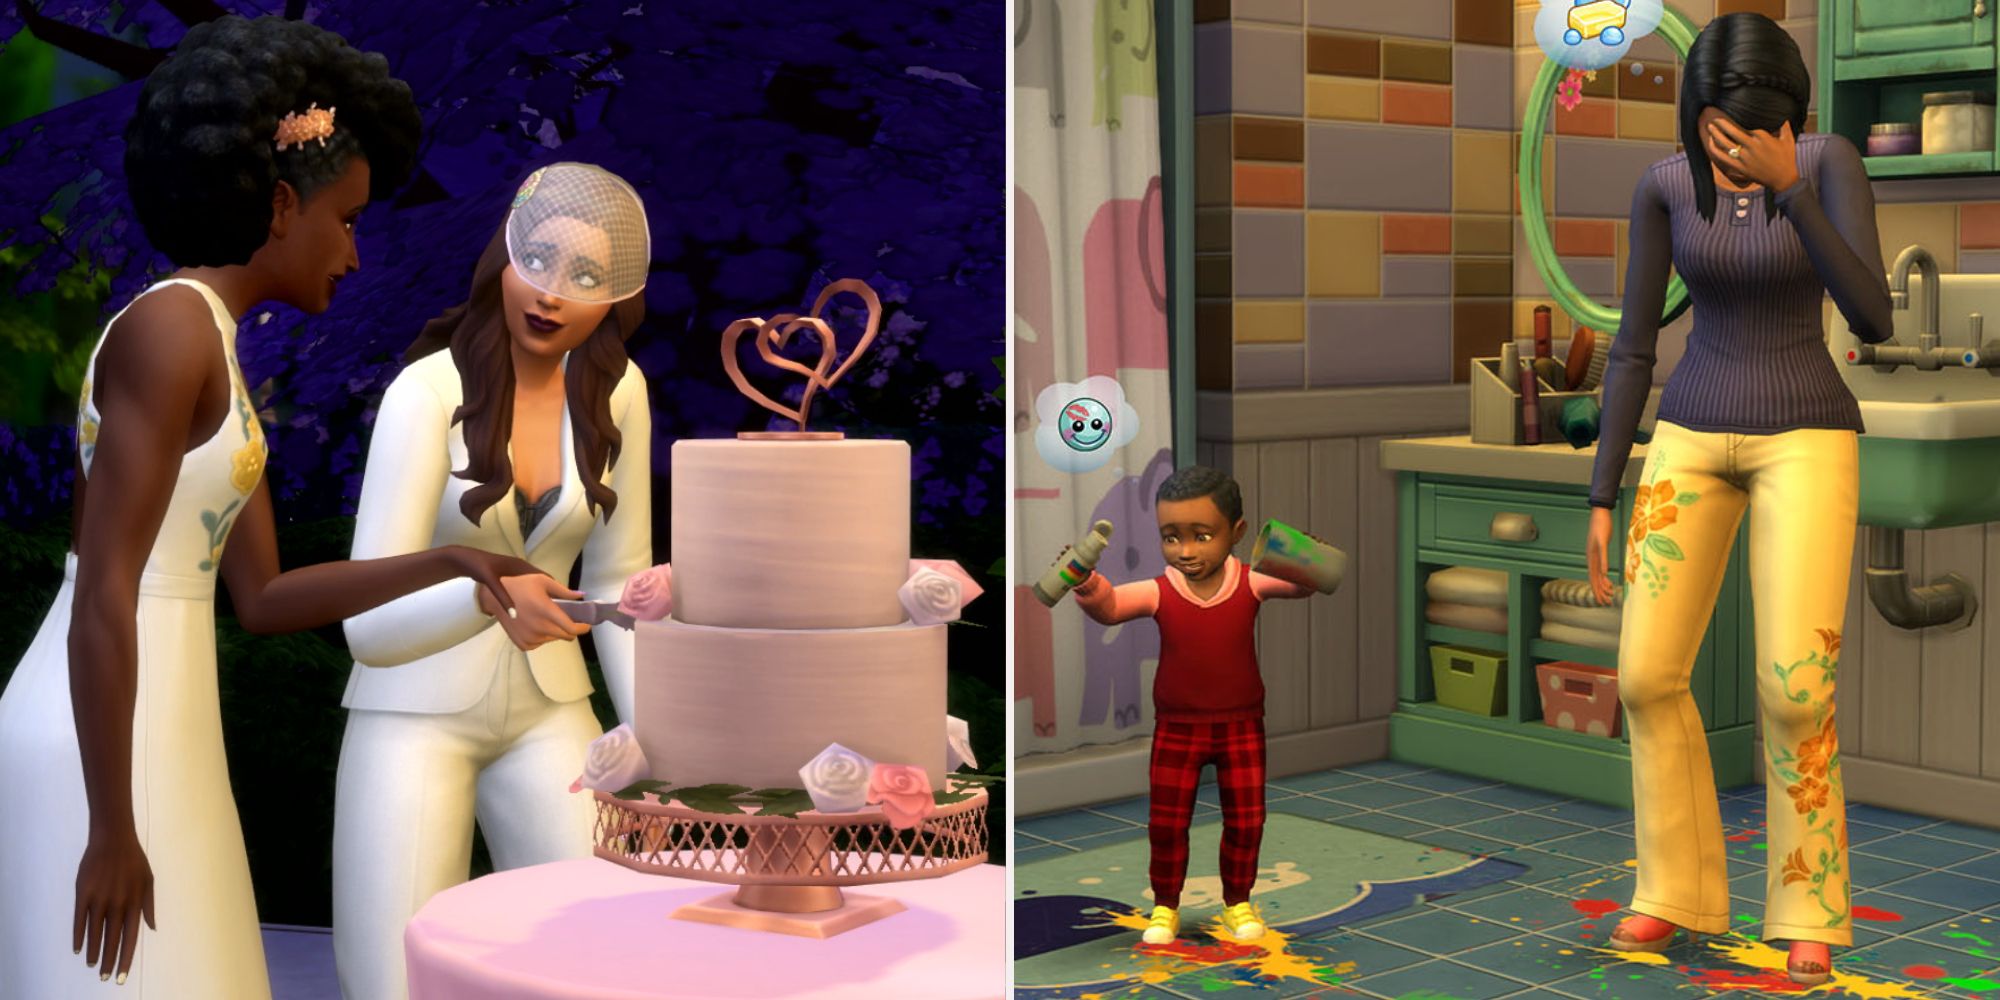 Sims 4: All Game Packs So Far, Ranked